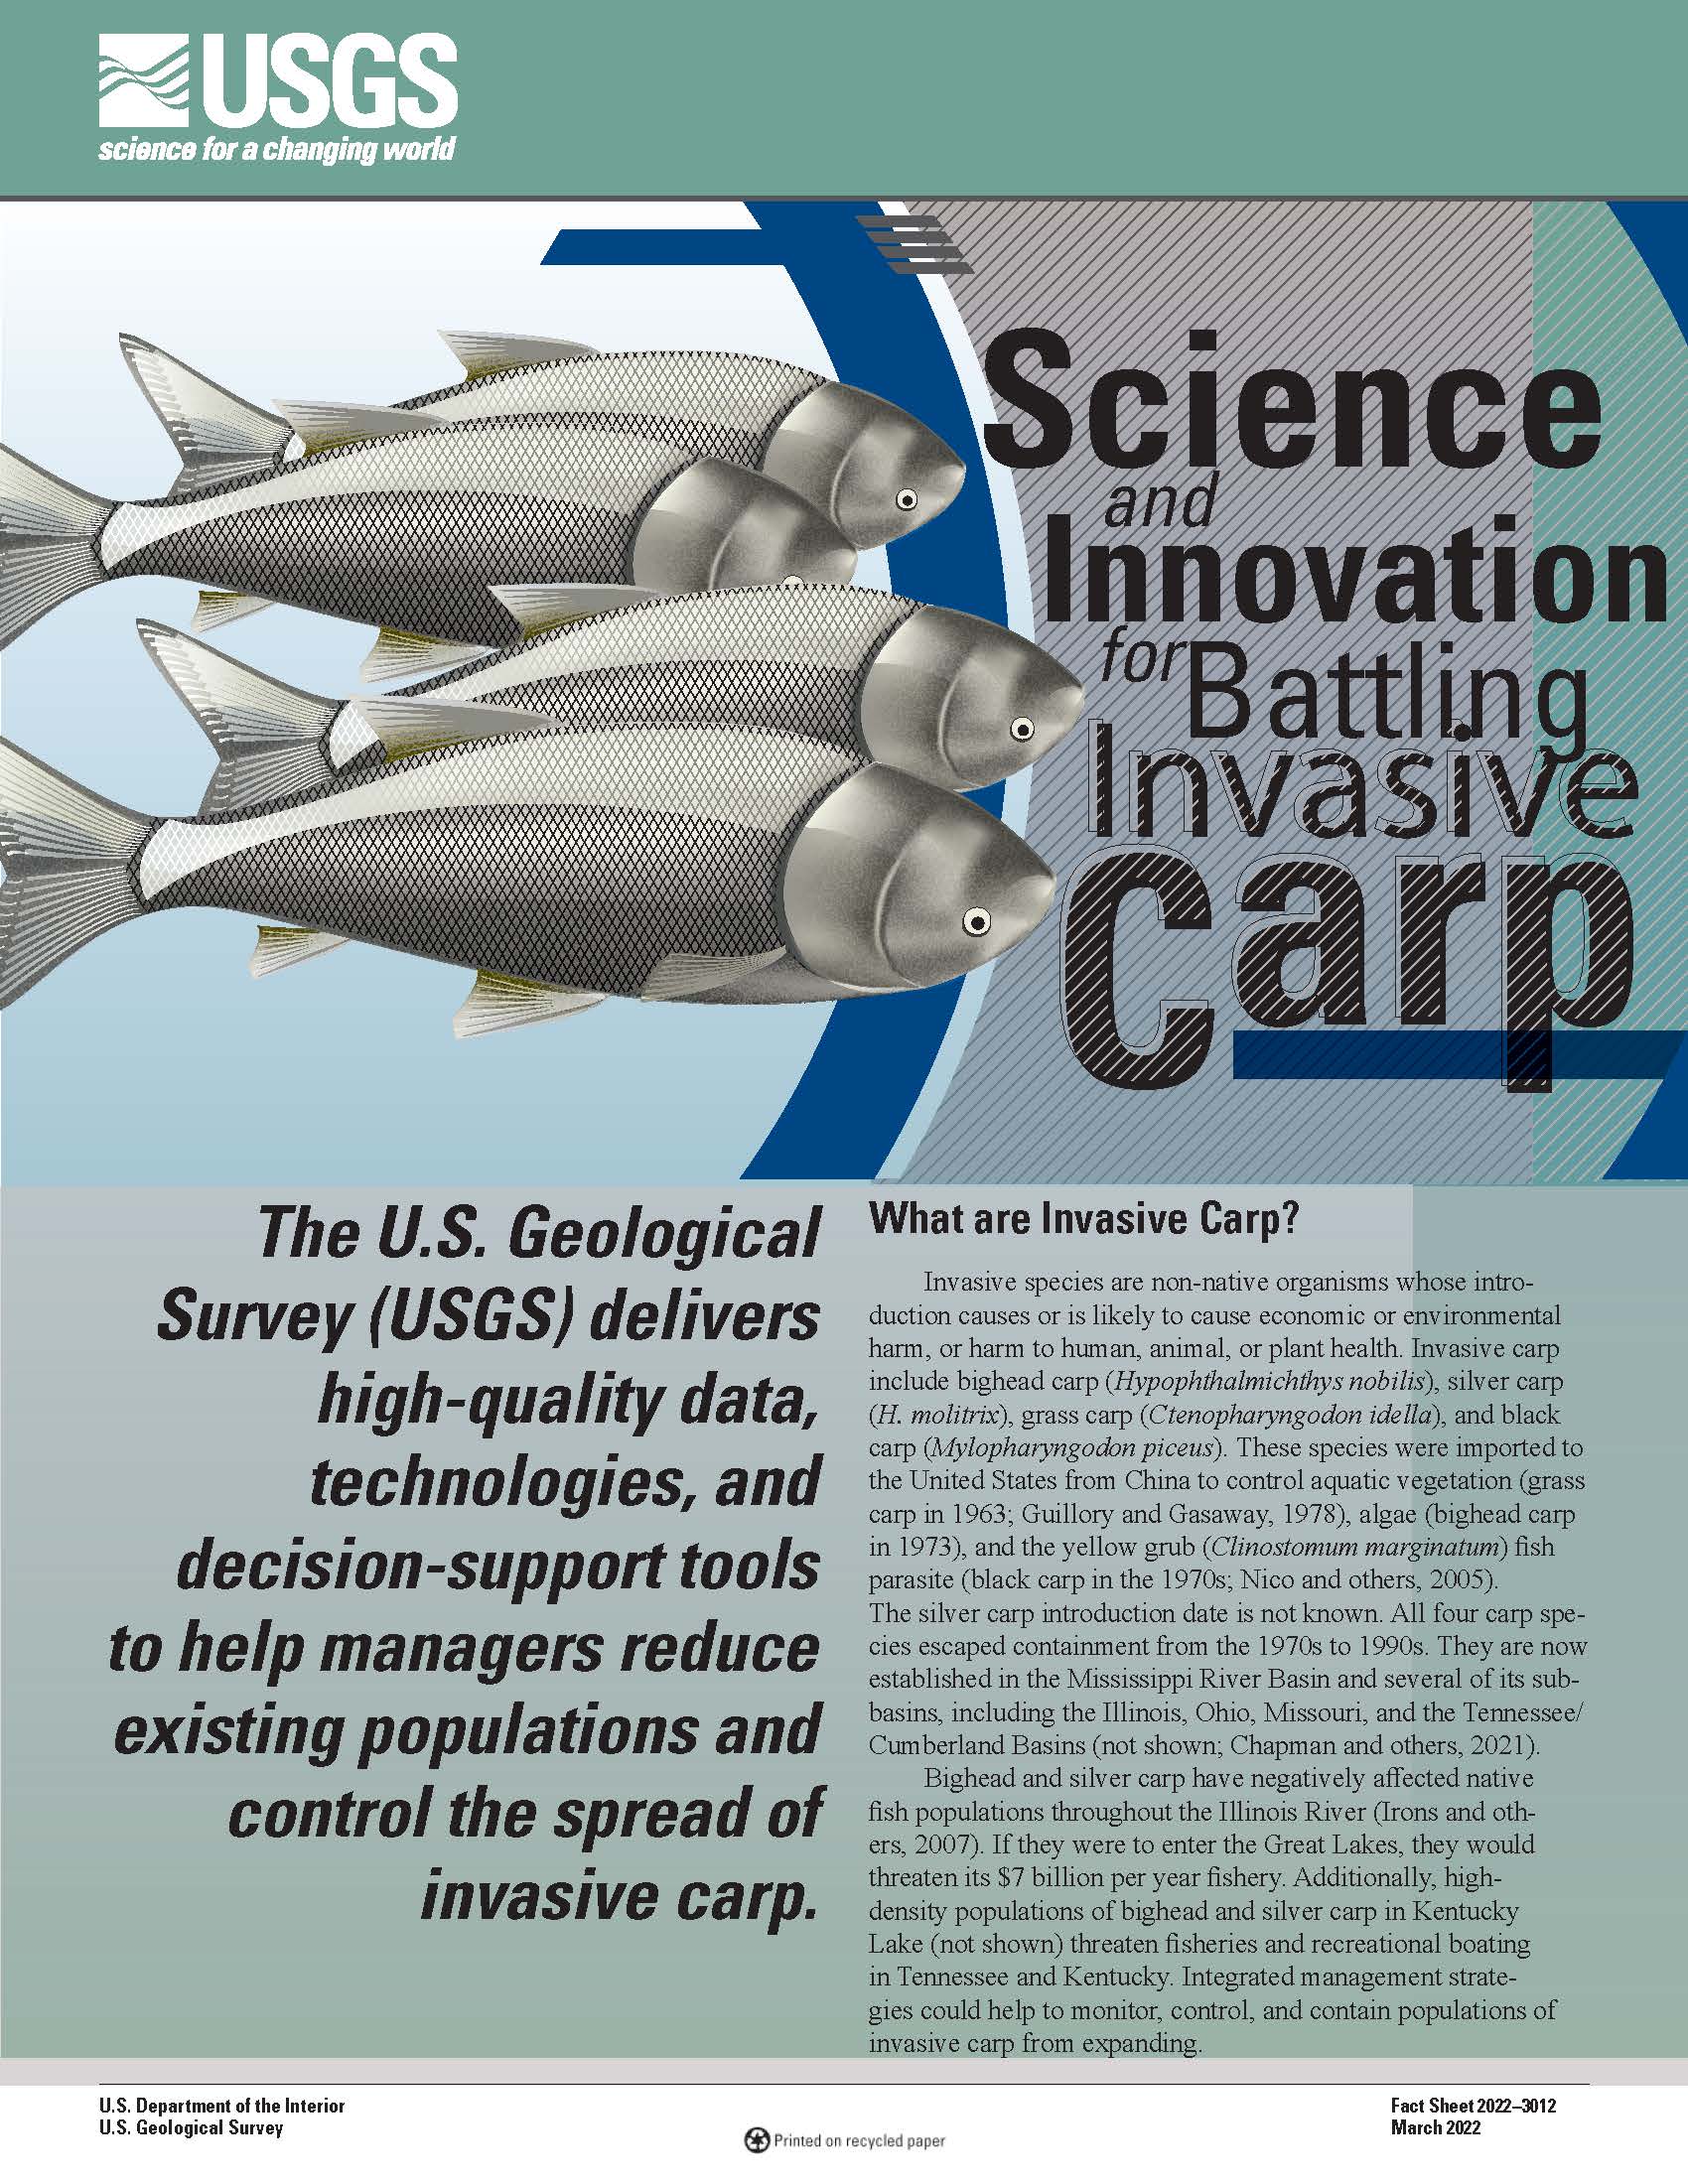 Science and Innovation for Battling Invasive Carp handout.